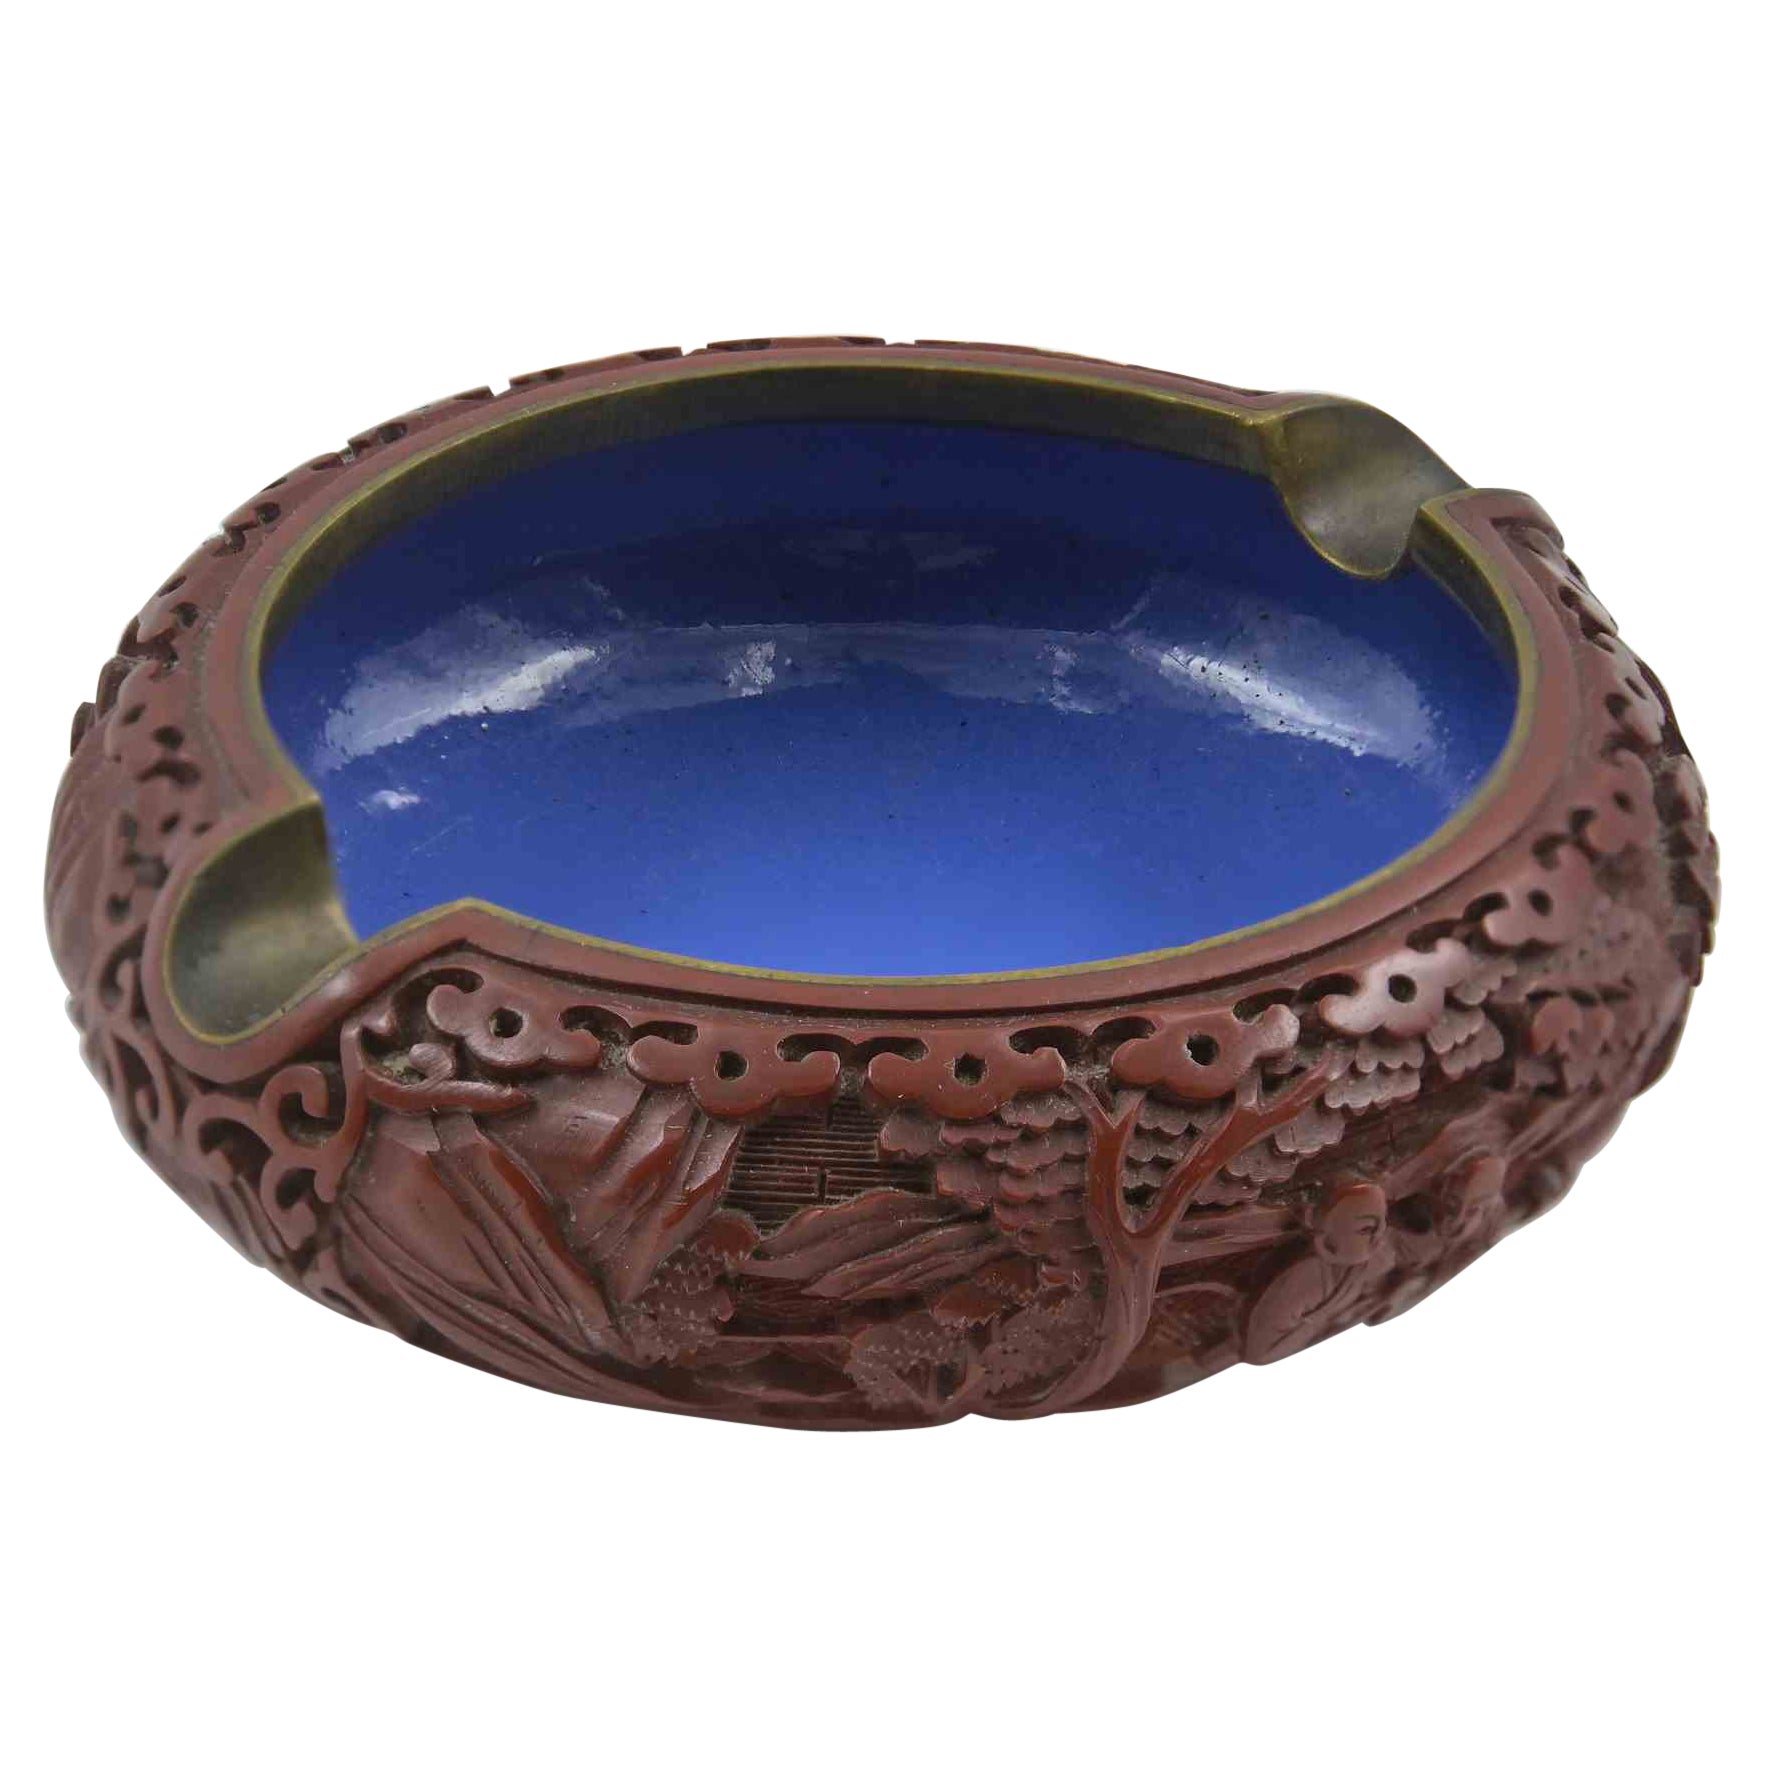 Vintage Chinese Ashtray in Sealing Wax, China, Early 20th Century